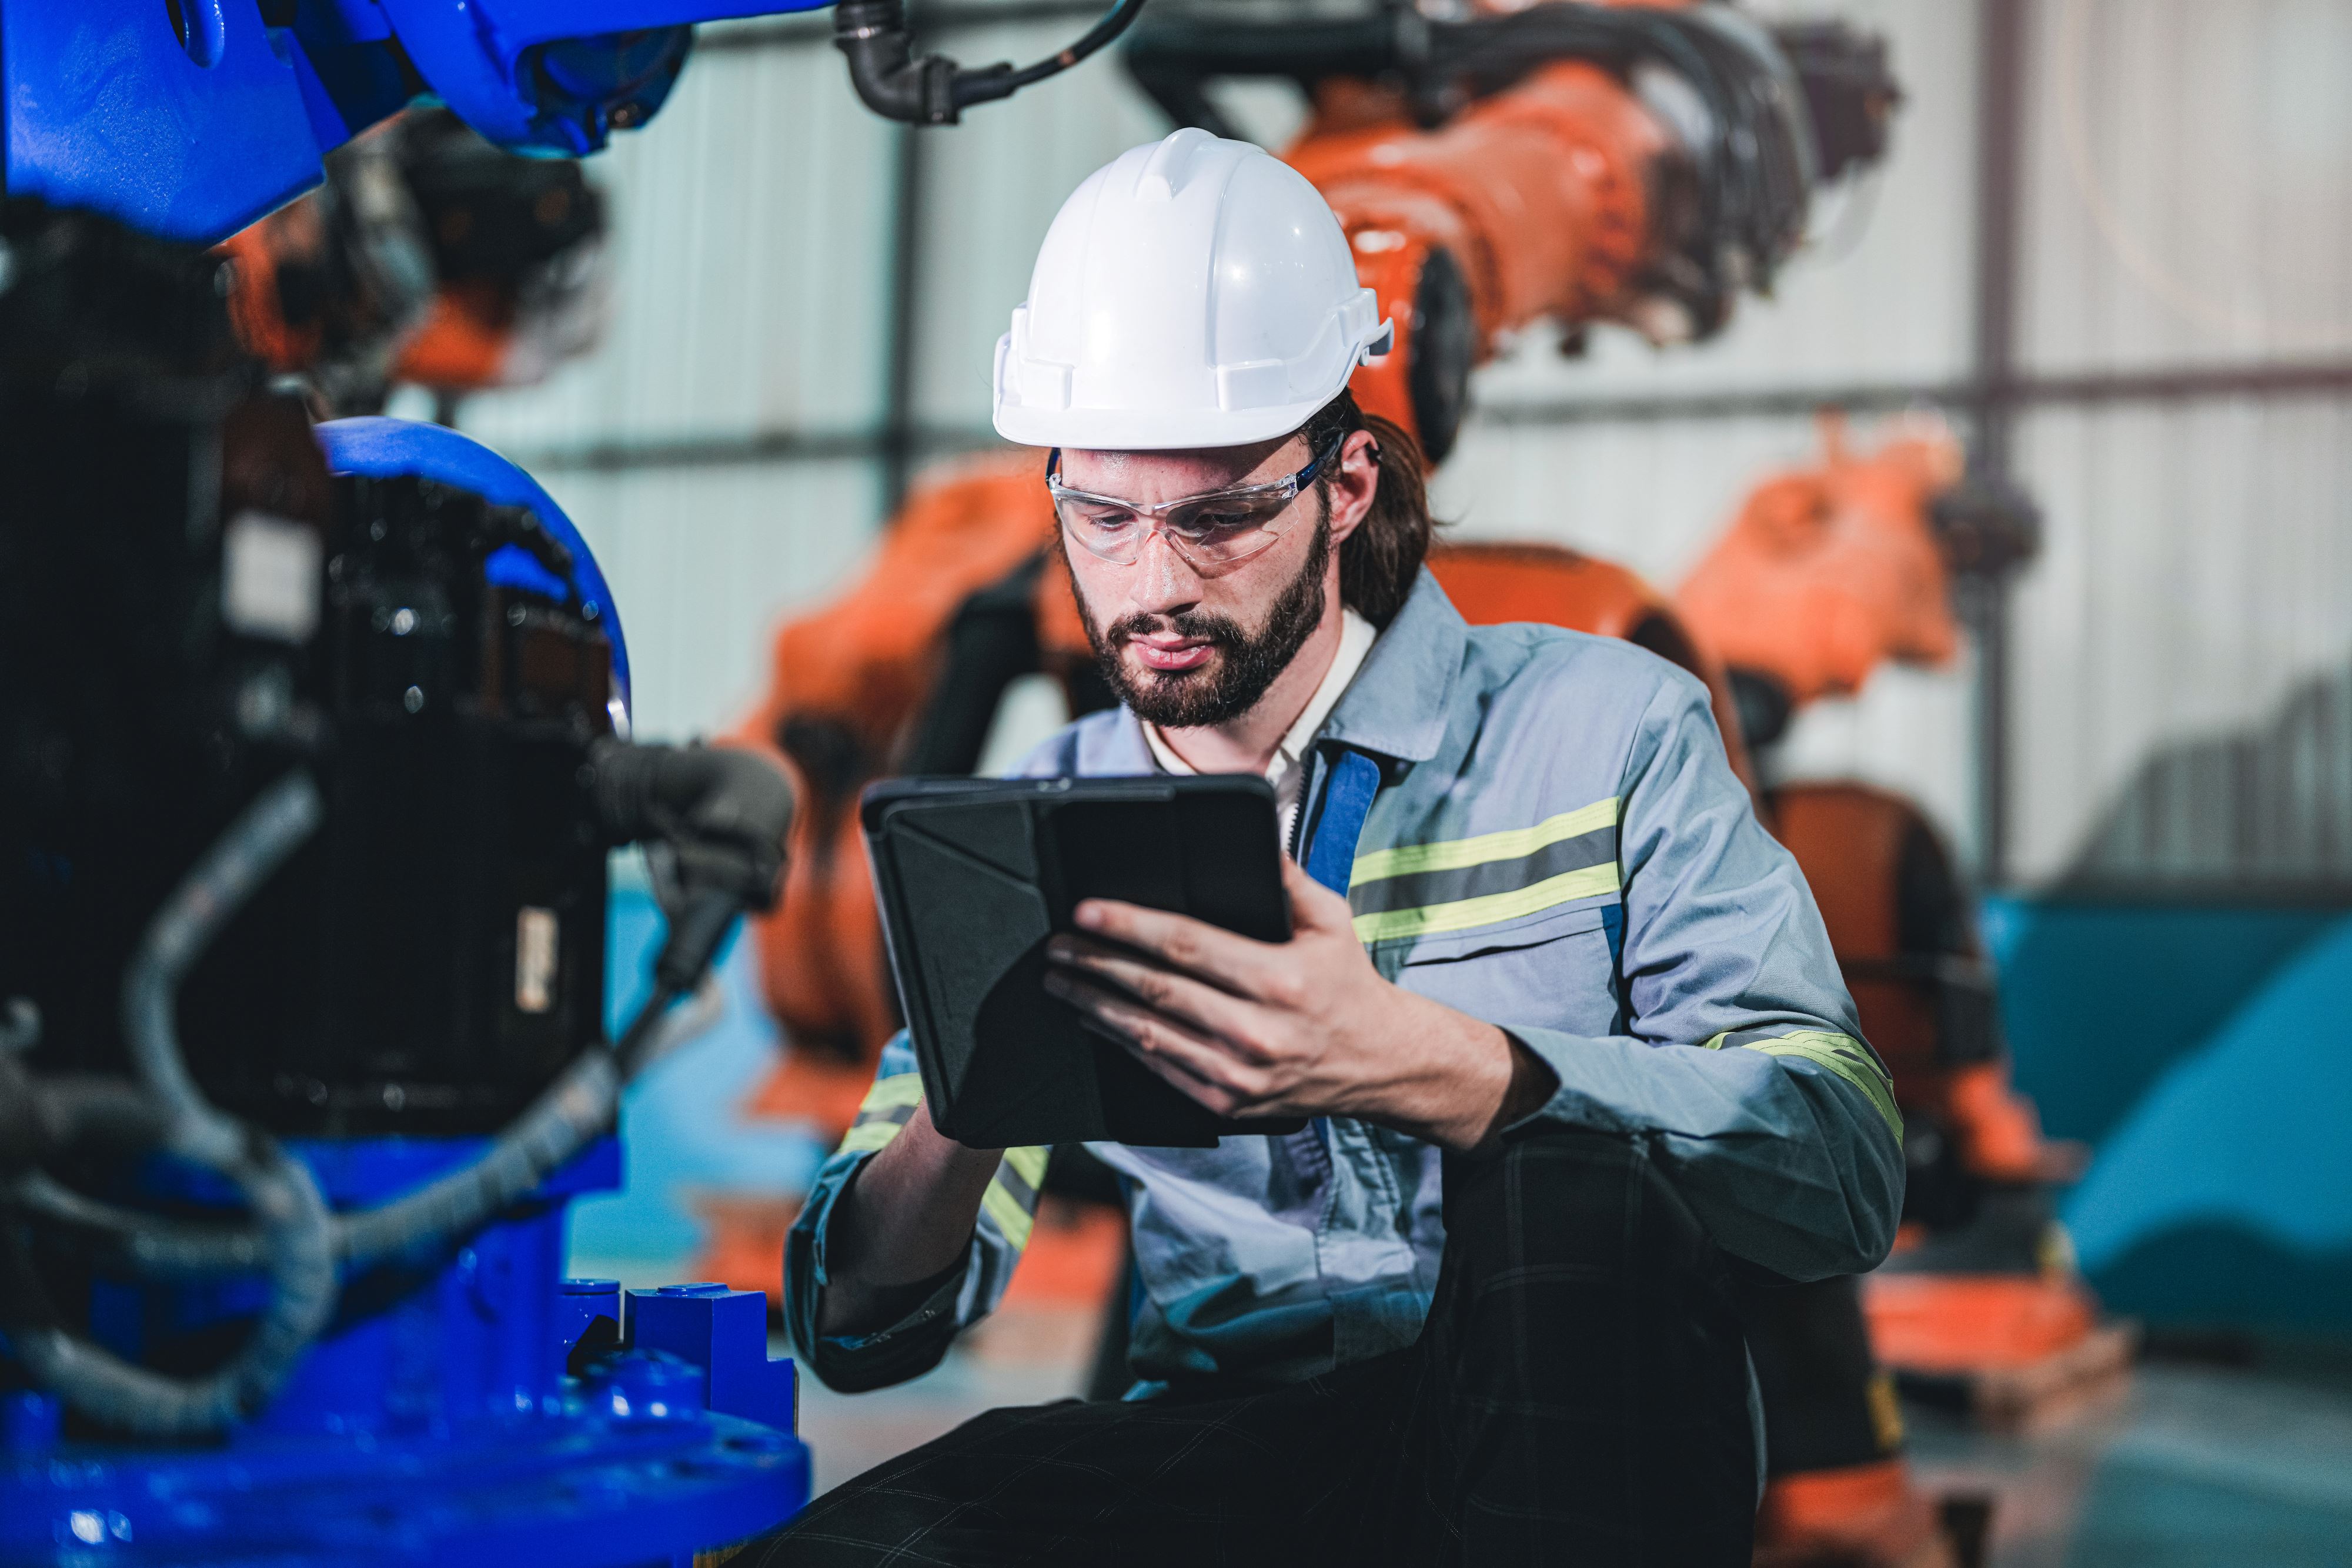 A white man with a beard and long hair, wearing a hard hat and working on a tablet, sits near a pair of large industrial robotic arms.